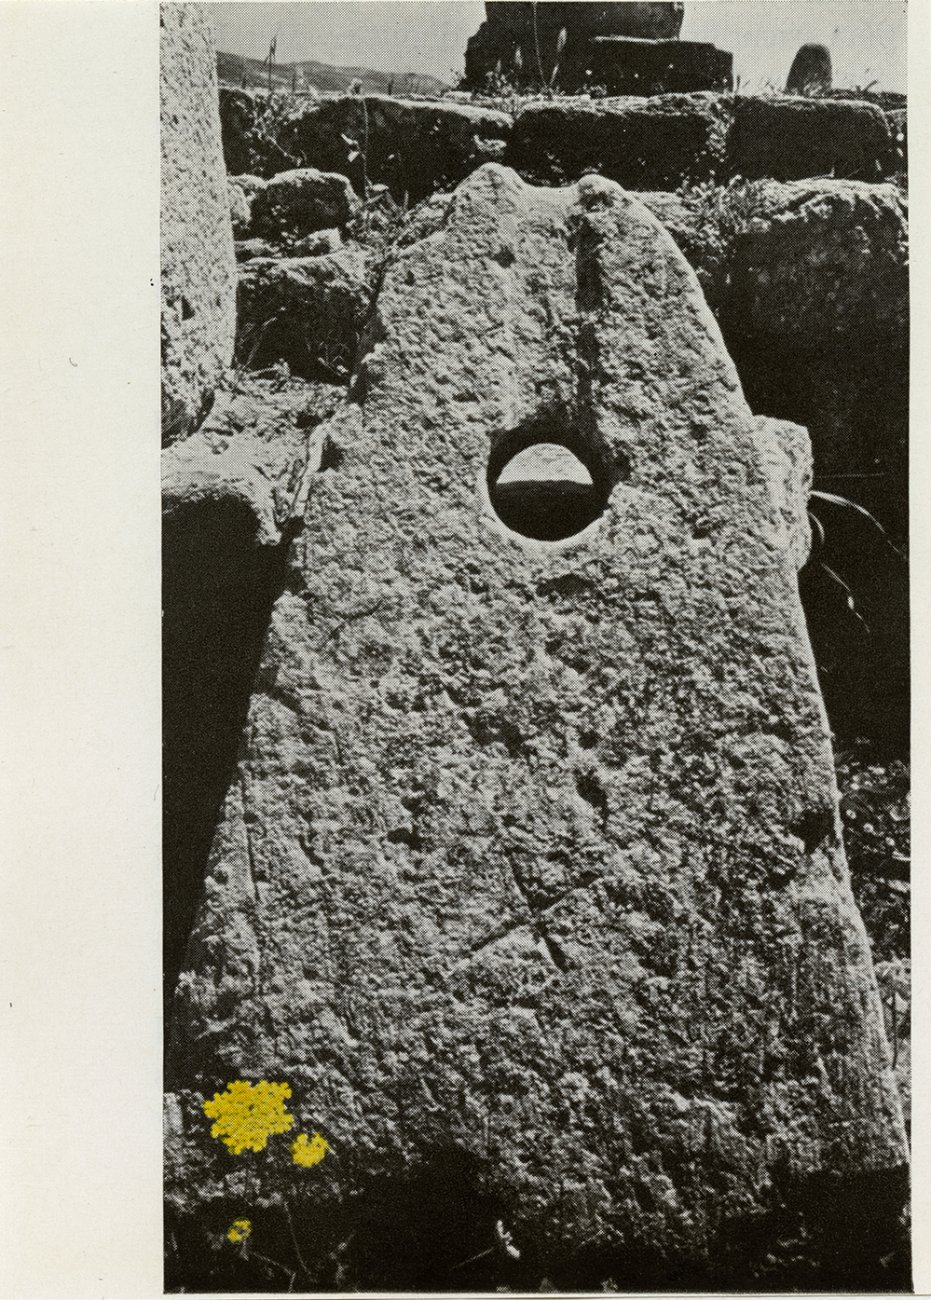 A black and white photograph of a rock structure with yellow flowers in the bottom left corner